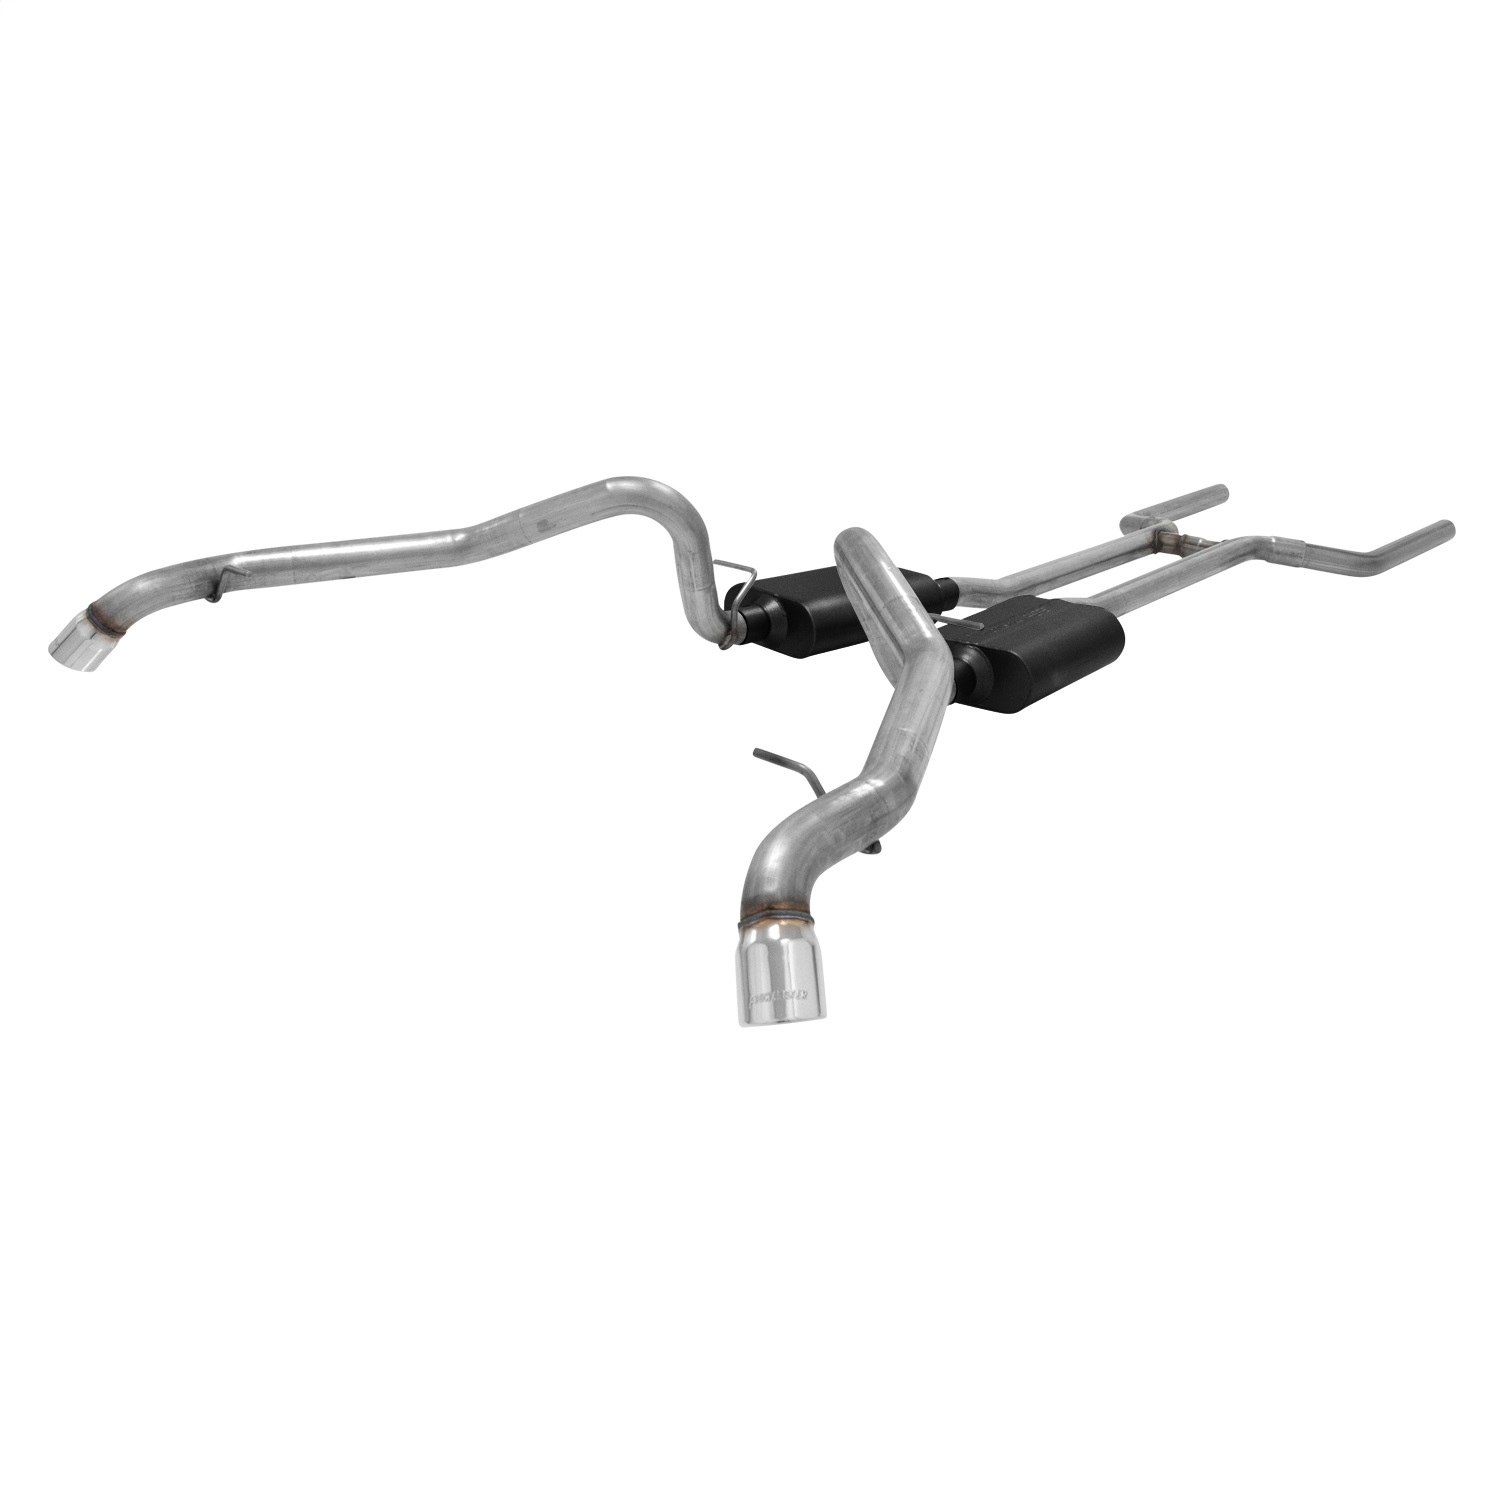 Flowmaster Flowmaster 817673 American Thunder Crossmember-Back Exhaust System Fits Chevy II